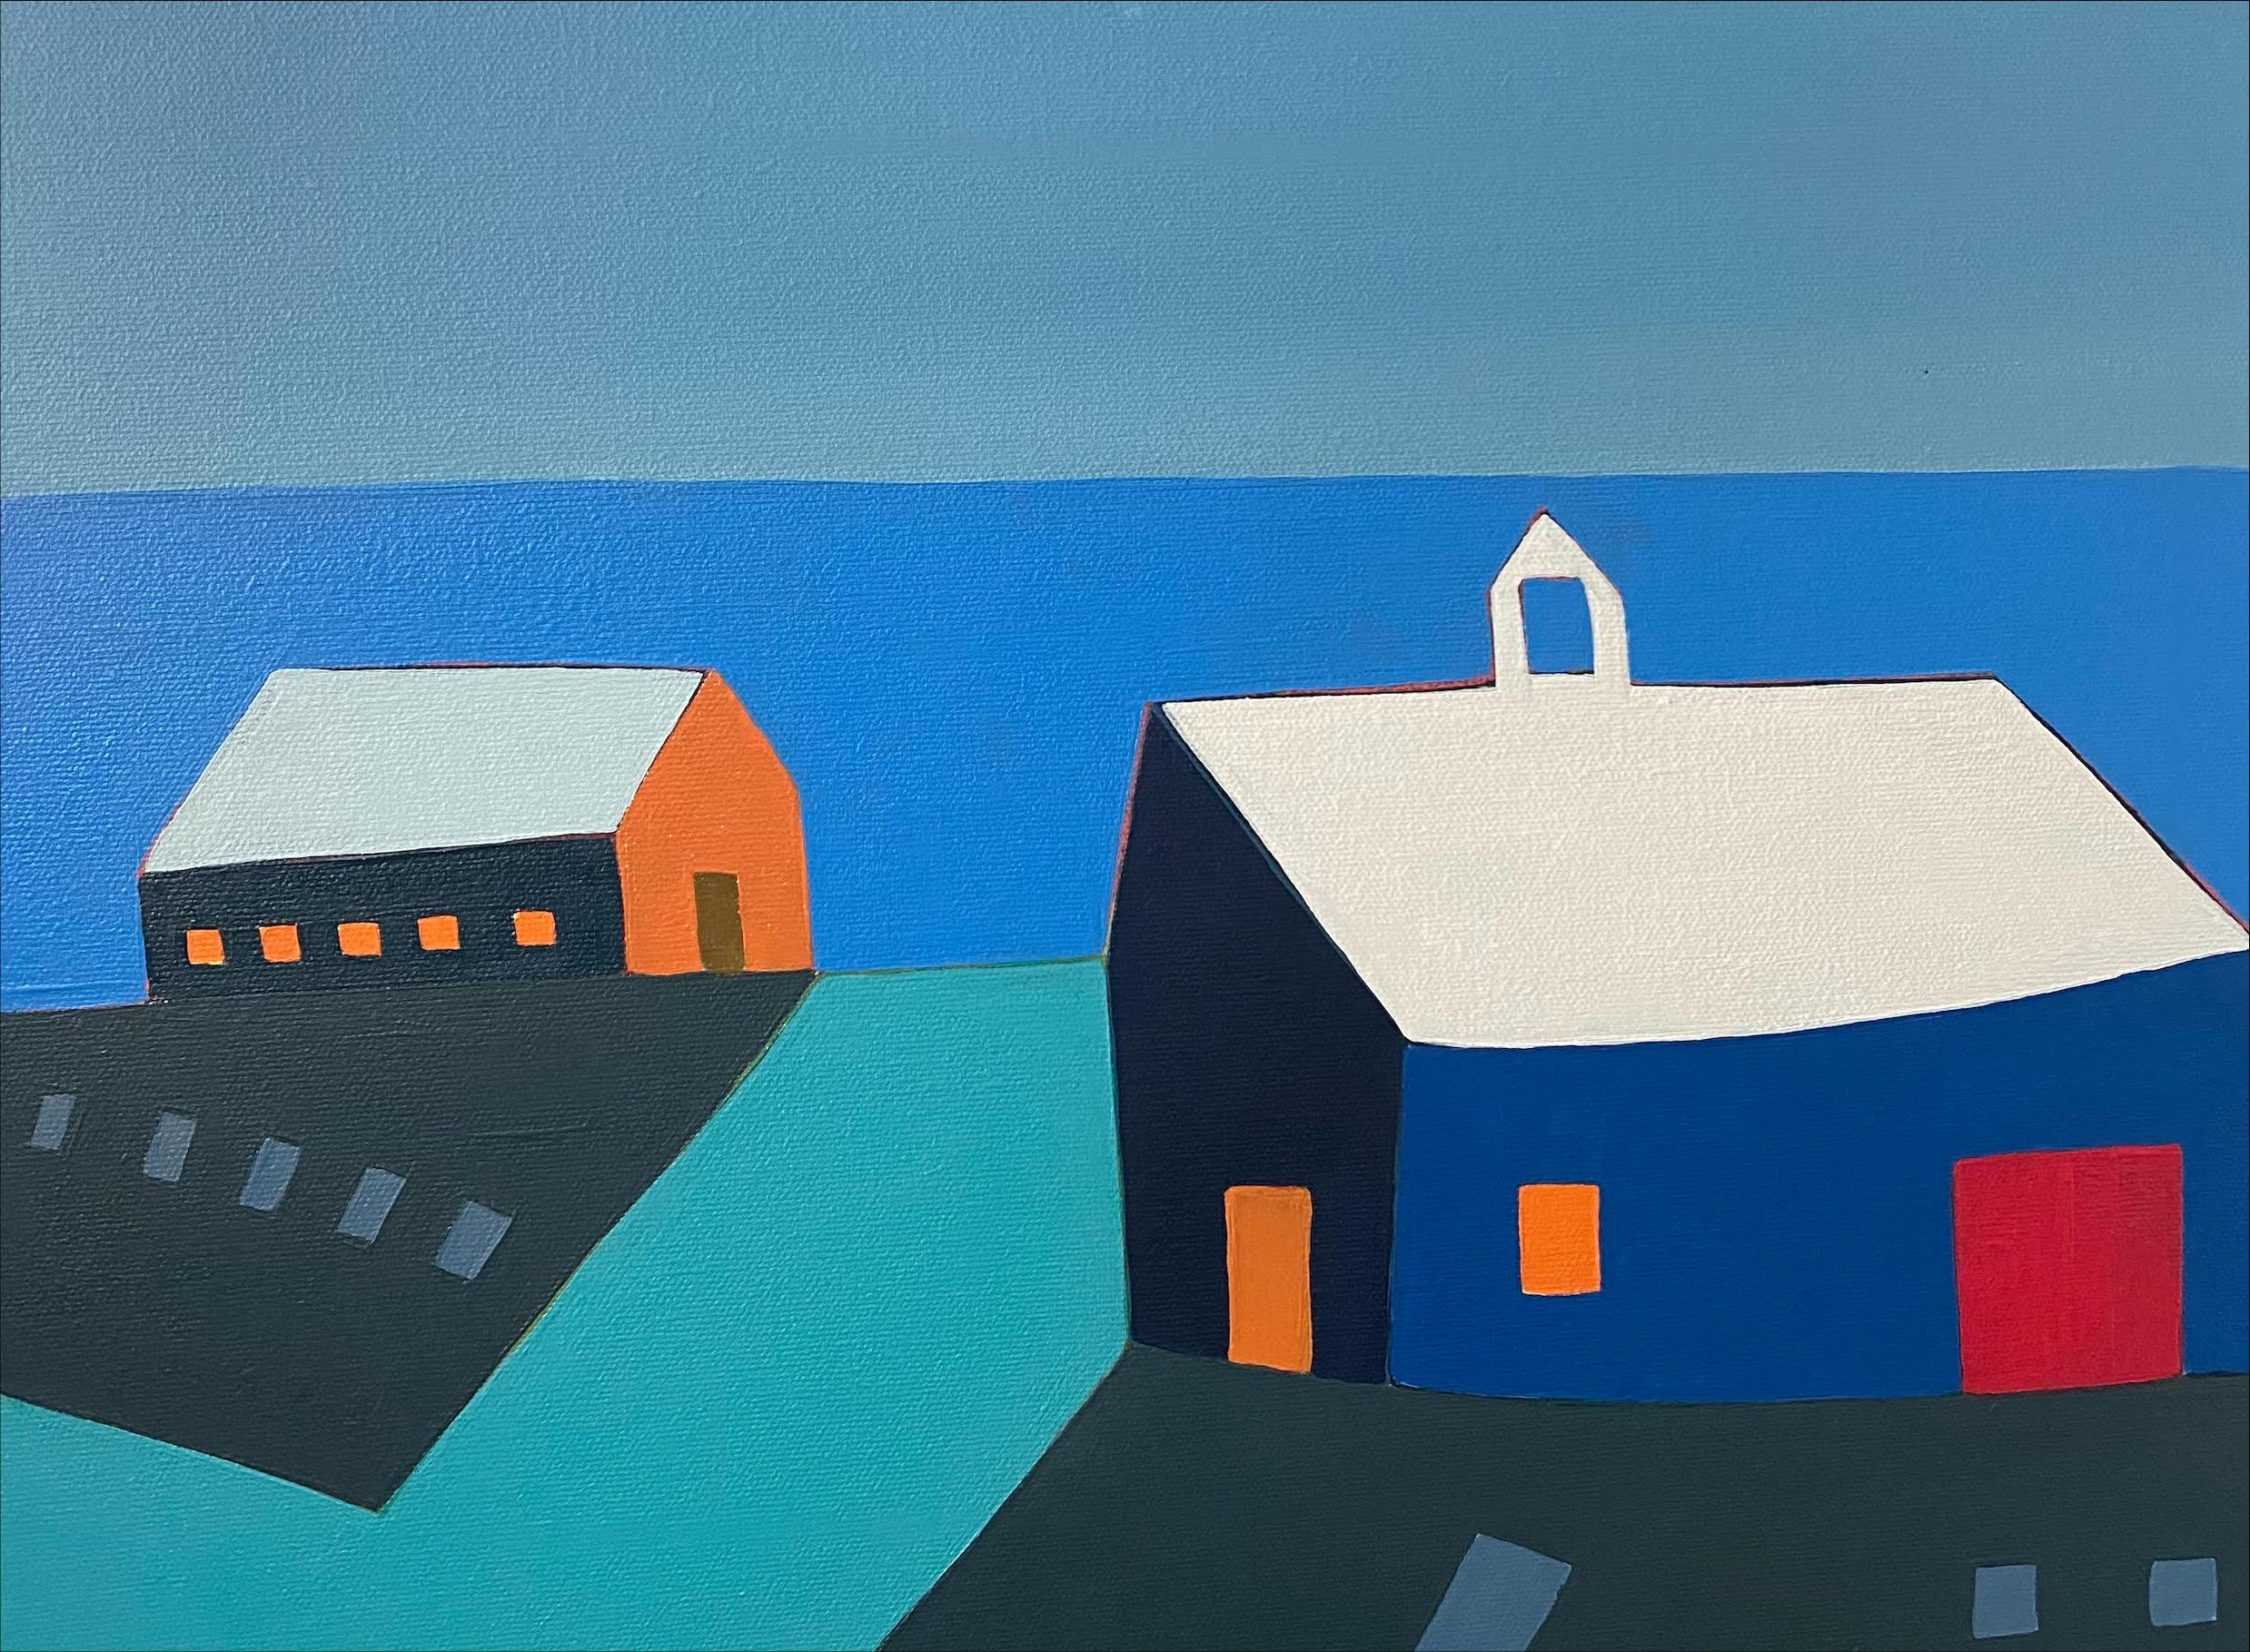 Sage Tucker-Ketcham - "Orange Barn and Blue Barn on Beach" colorful  geometric landscape oil painting For Sale at 1stDibs